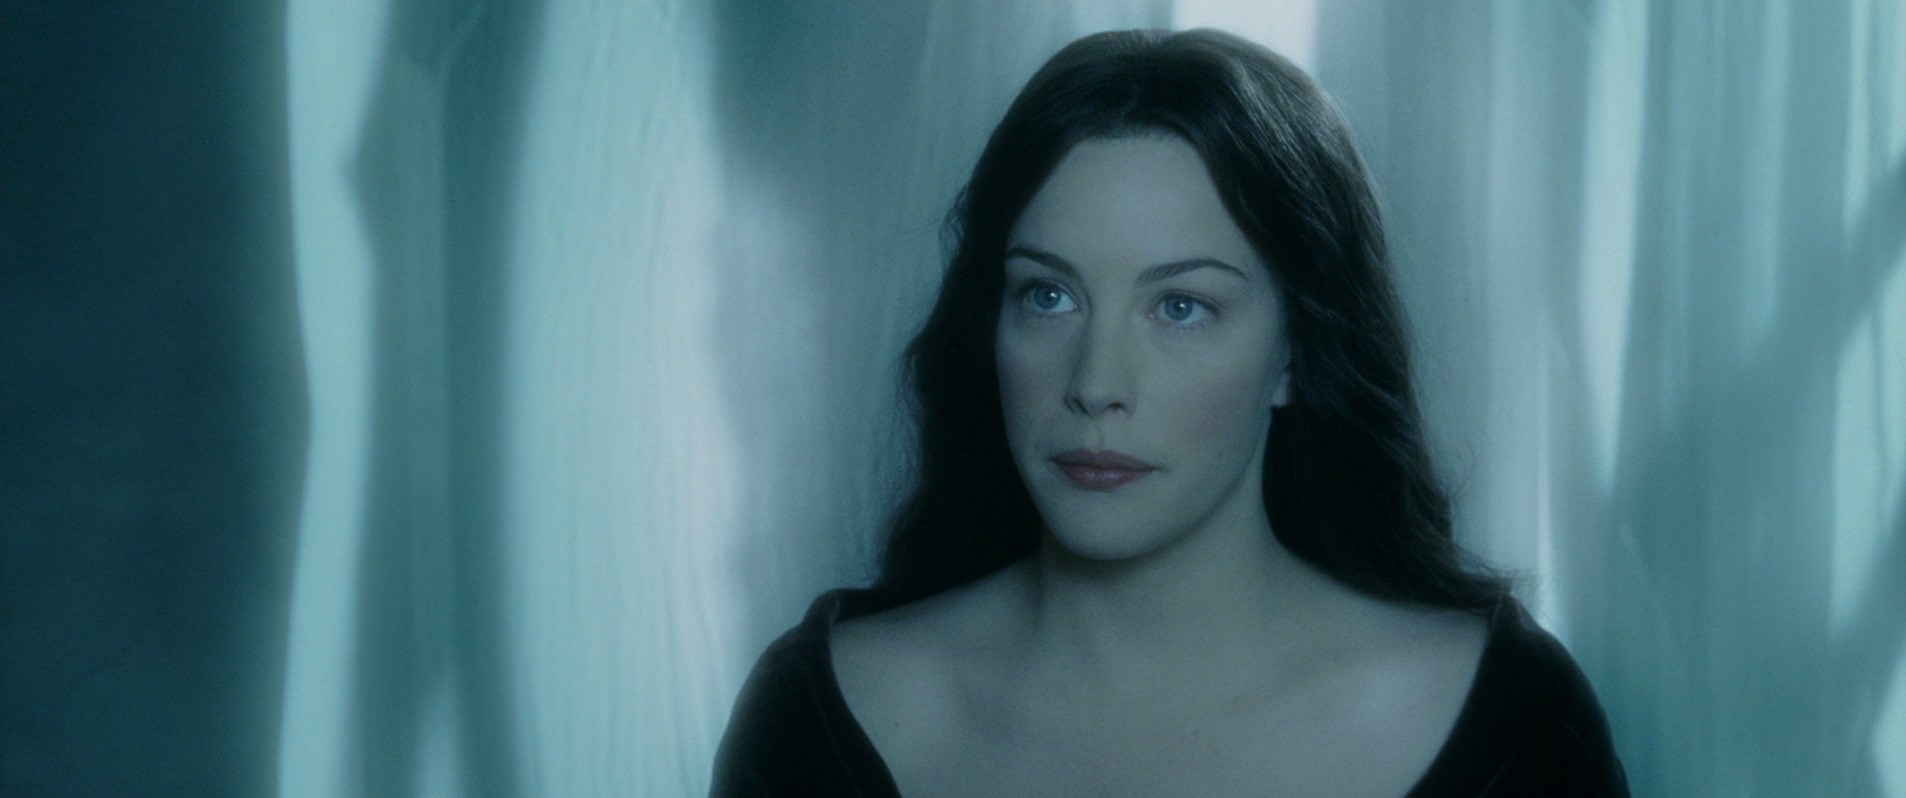 Liv Tyler in The Lord of the Rings: The Two Towers (2002)